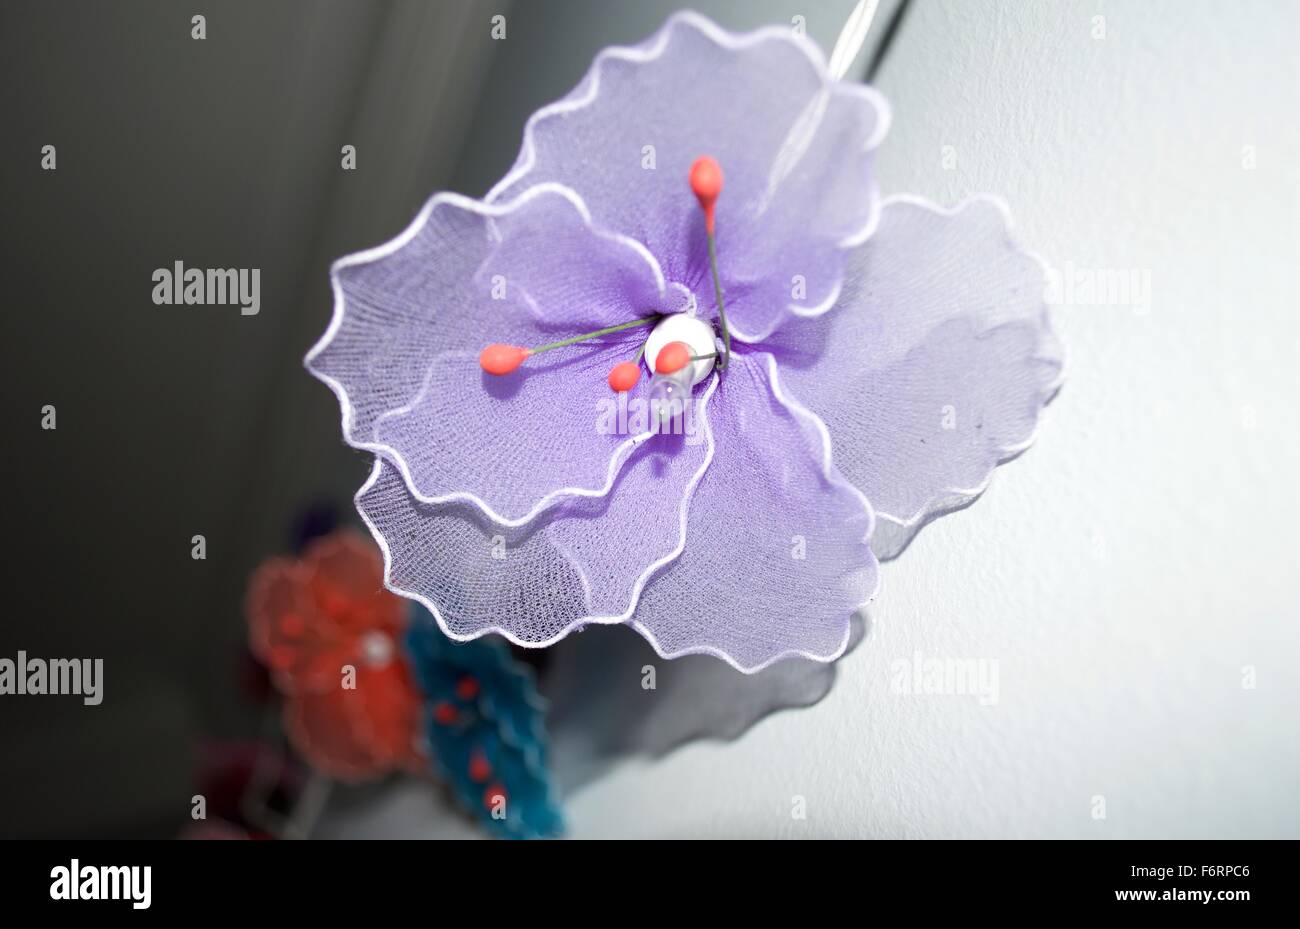 Flower shaper, home decoration light for Christmas, diwali and festival decoration Stock Photo